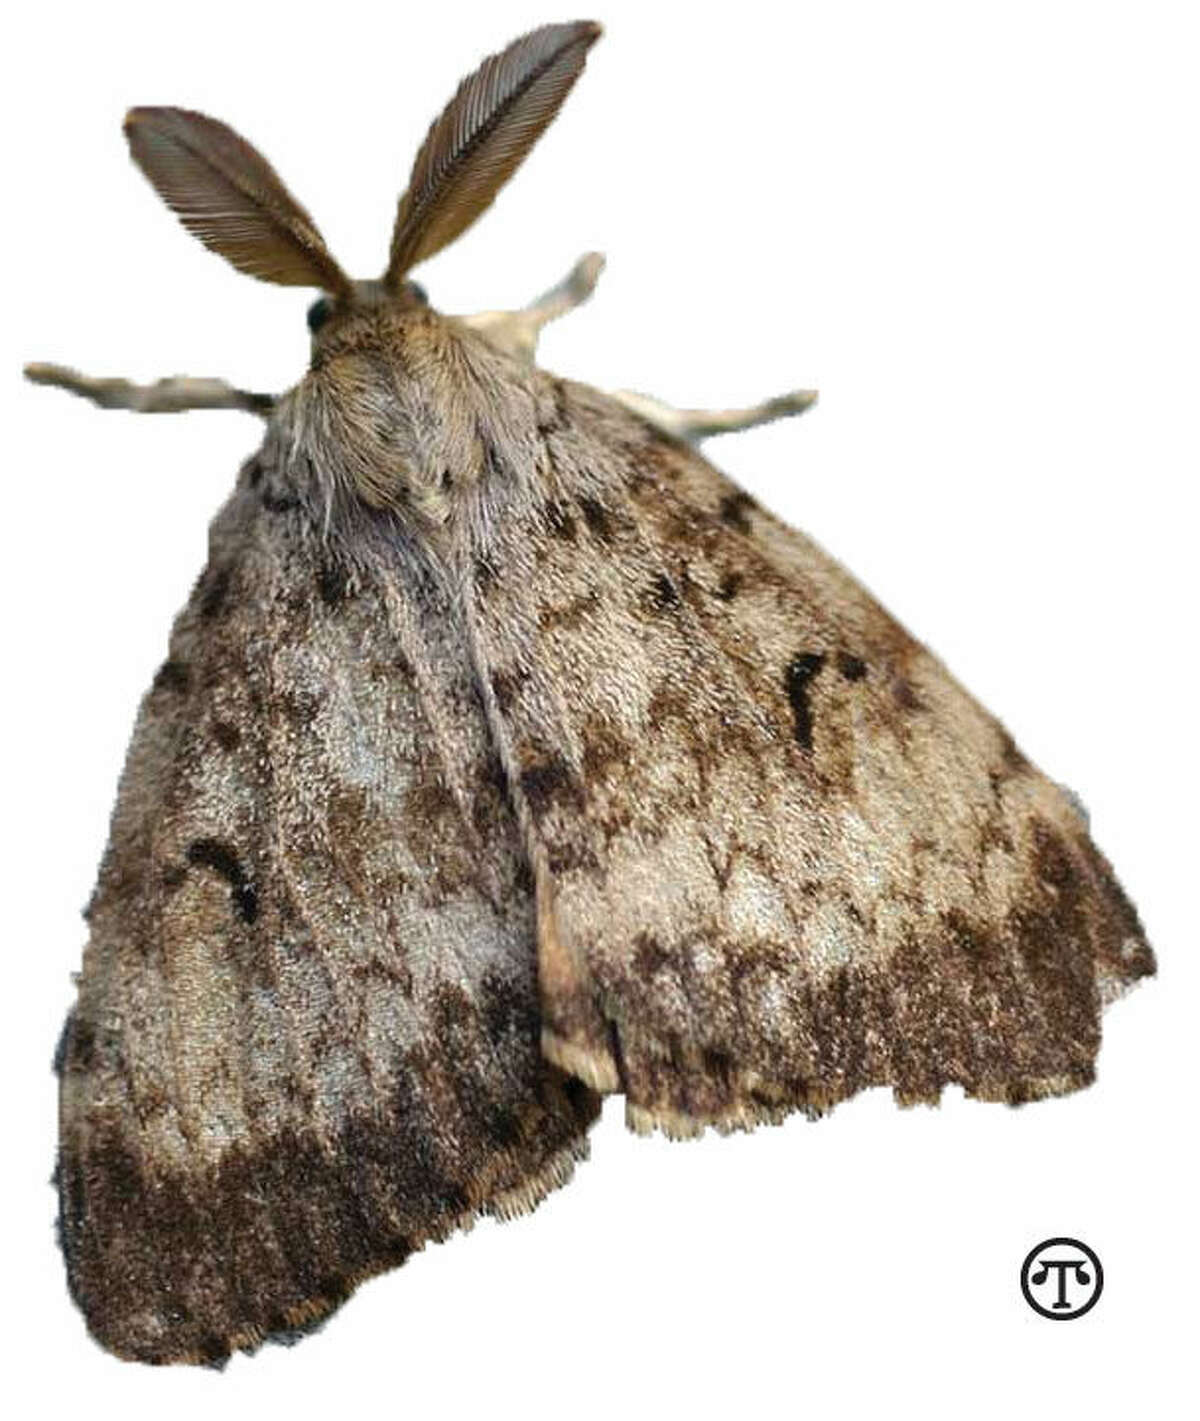 When you move, preserve your new neighborhood. Don't bring in gypsy moths. (NAPS)